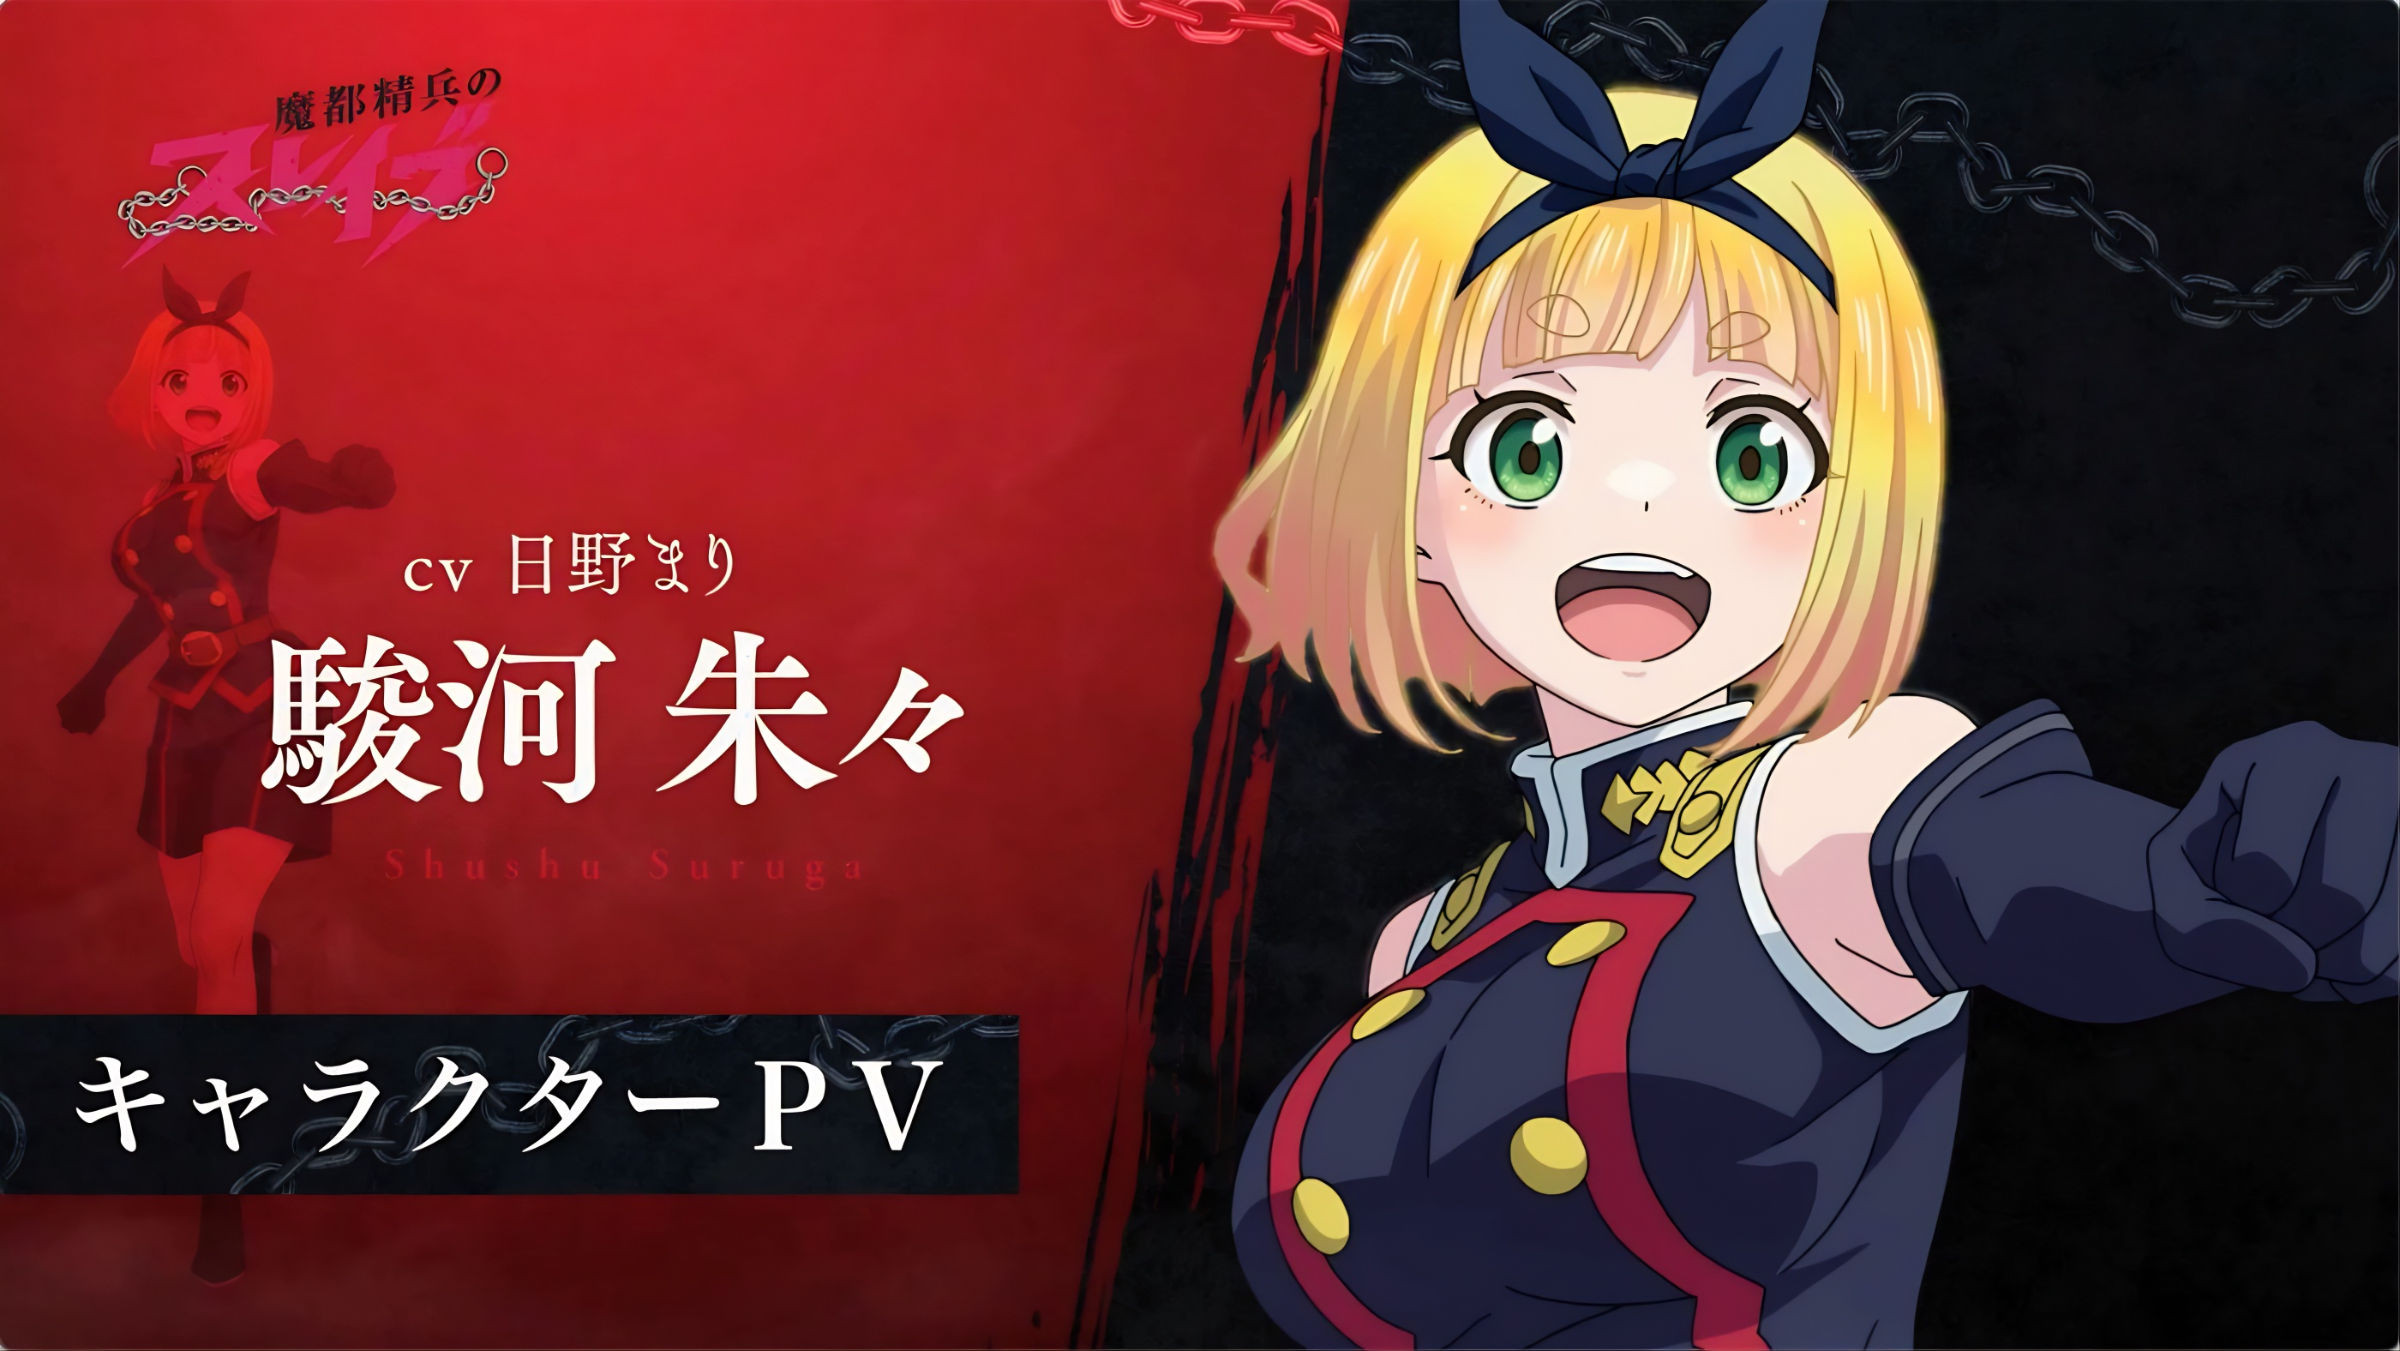 Chained Soldier Releases Character PV Trailer for Shushu Suruga